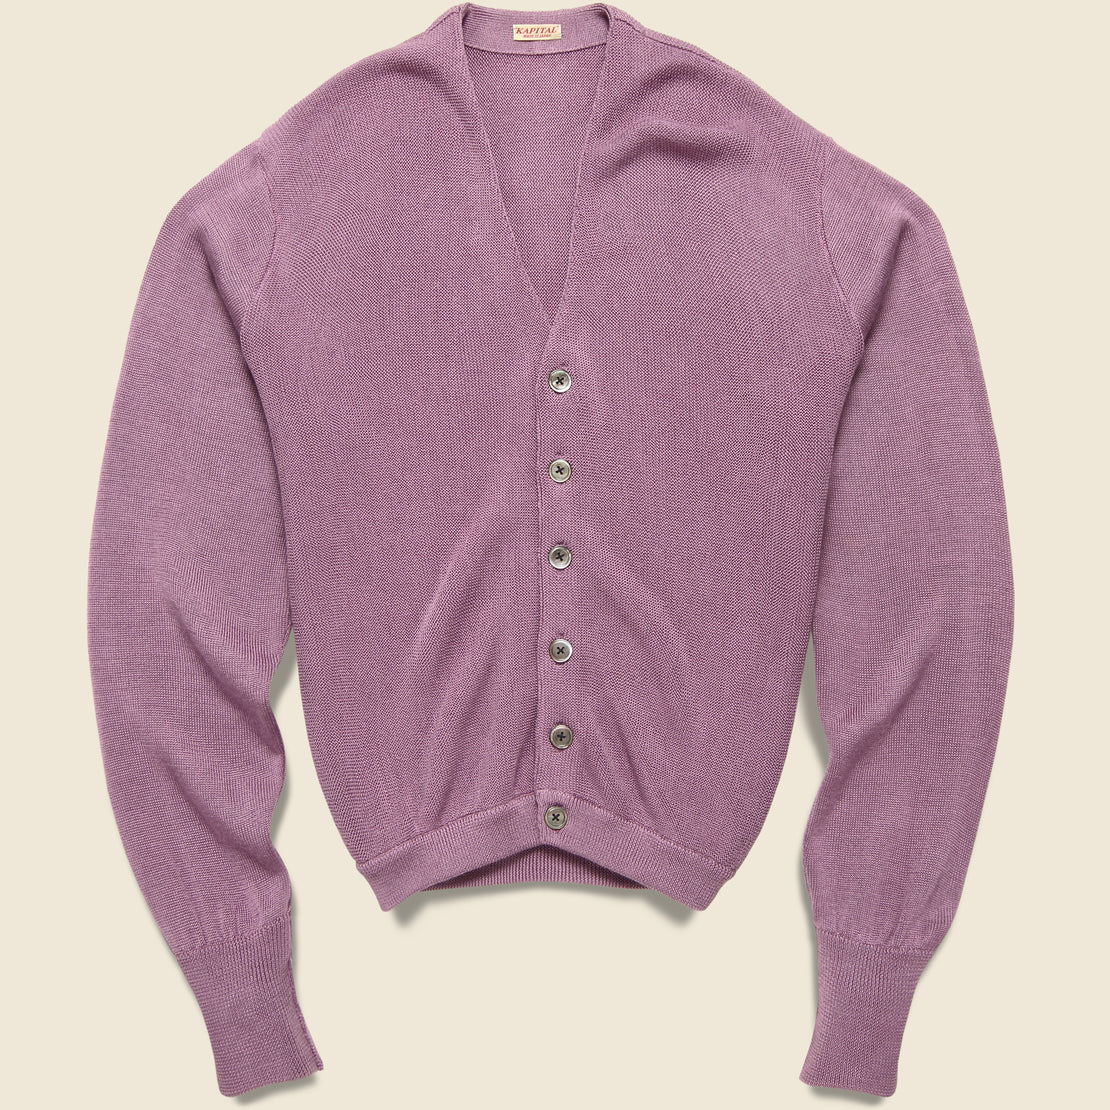 Coneybowy Short Cardigan - Pink Purple - Kapital - STAG Provisions - Tops - Sweater